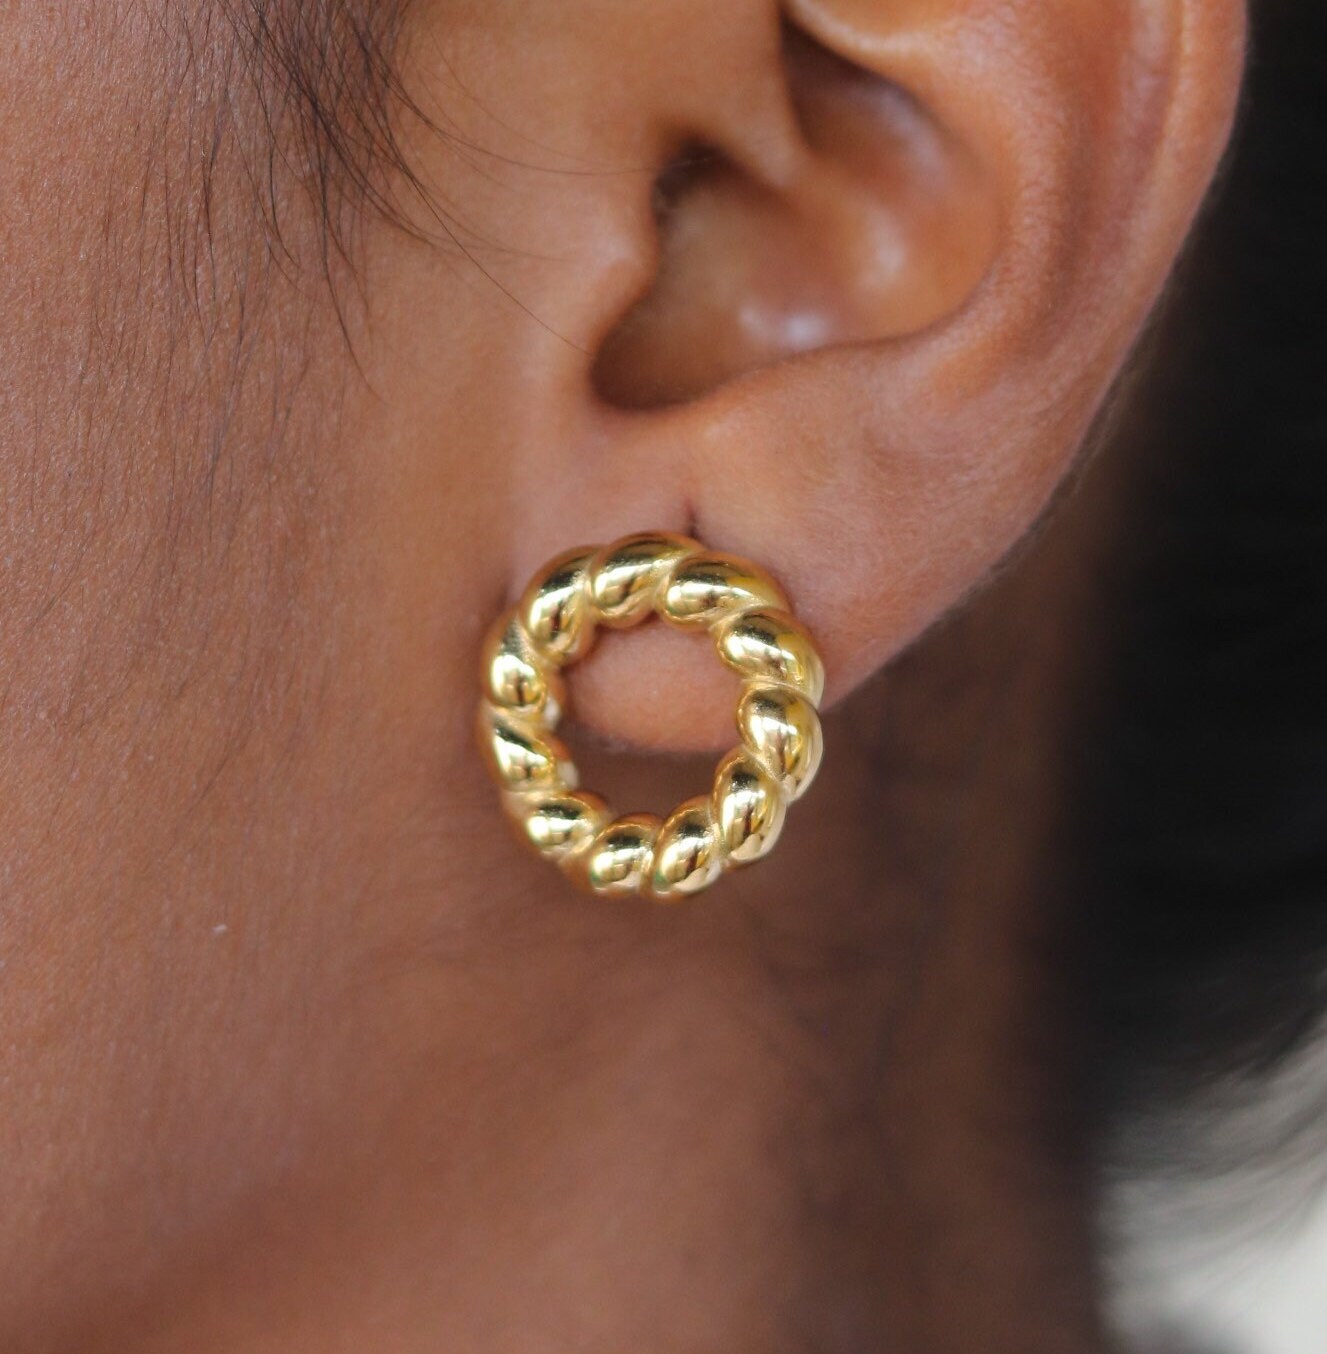 18K Gold-filled Open Circle Plain and Twisted Stud Earrings